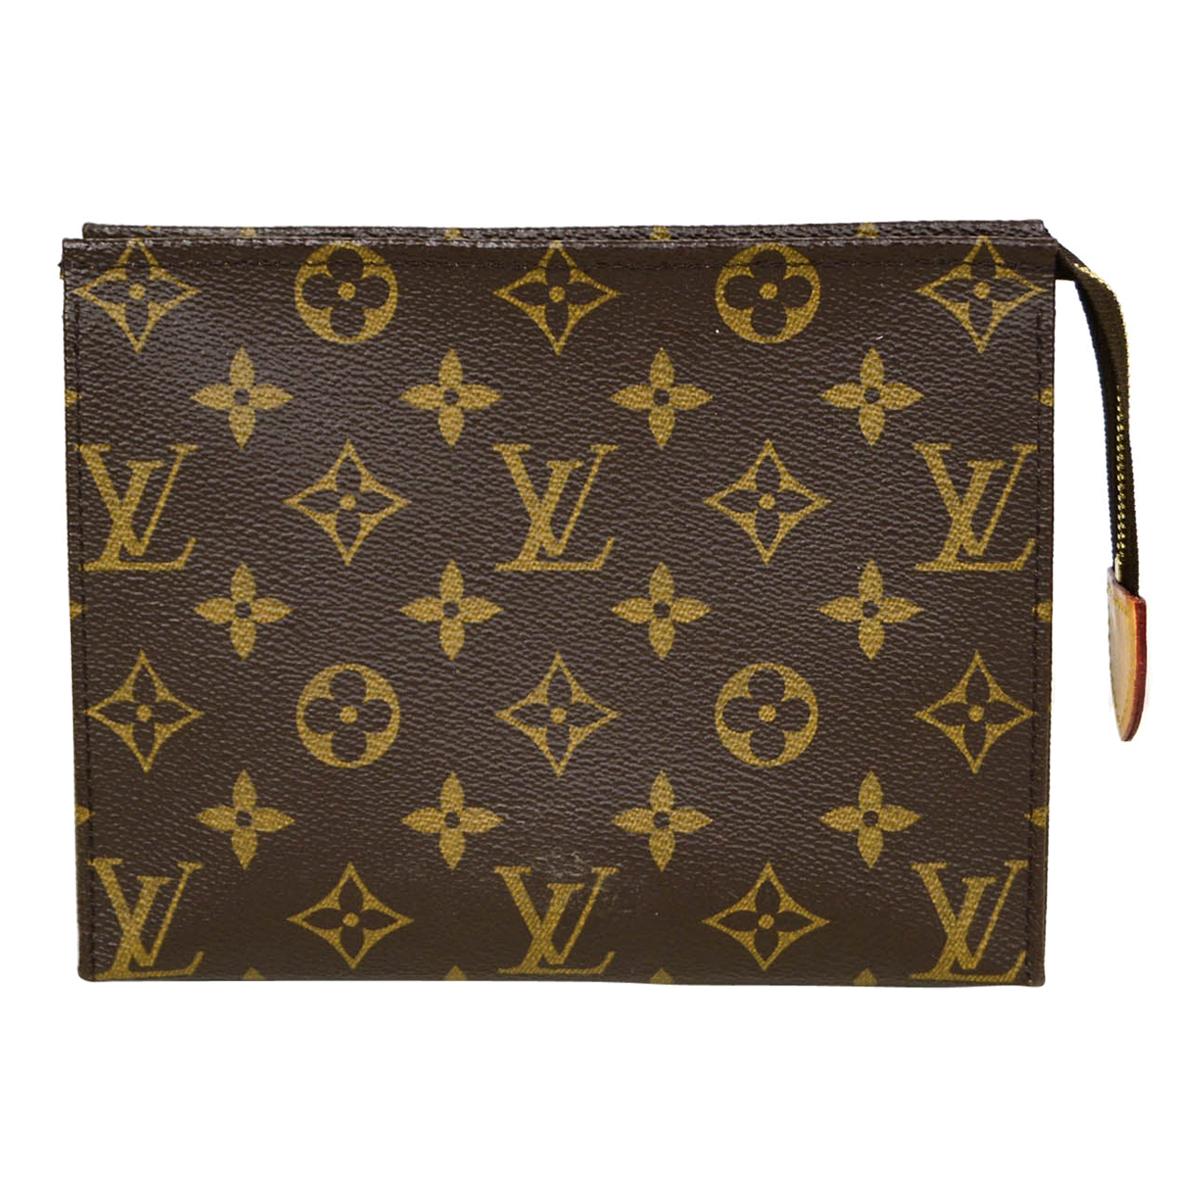 Louis Vuitton SOLD OUT Monogram Coated Canvas Toiletry Pouch 19 Cosmetic Bag